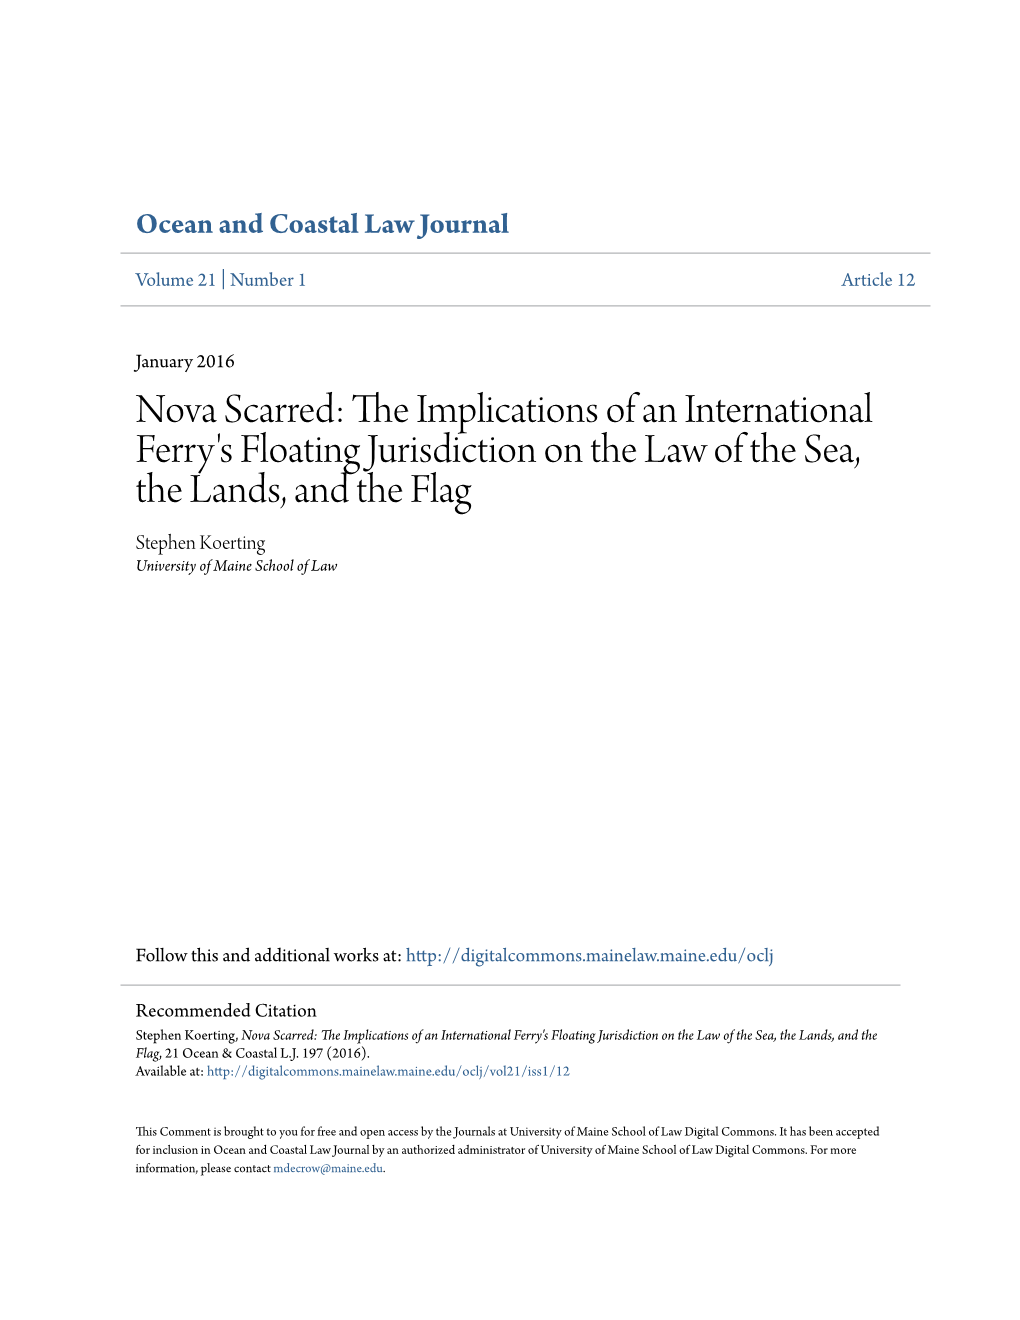 Nova Scarred: the Implications of an International Ferry's Floating Jurisdiction on the Law of the Sea, the Lands, and the Flag, 21 Ocean & Coastal L.J